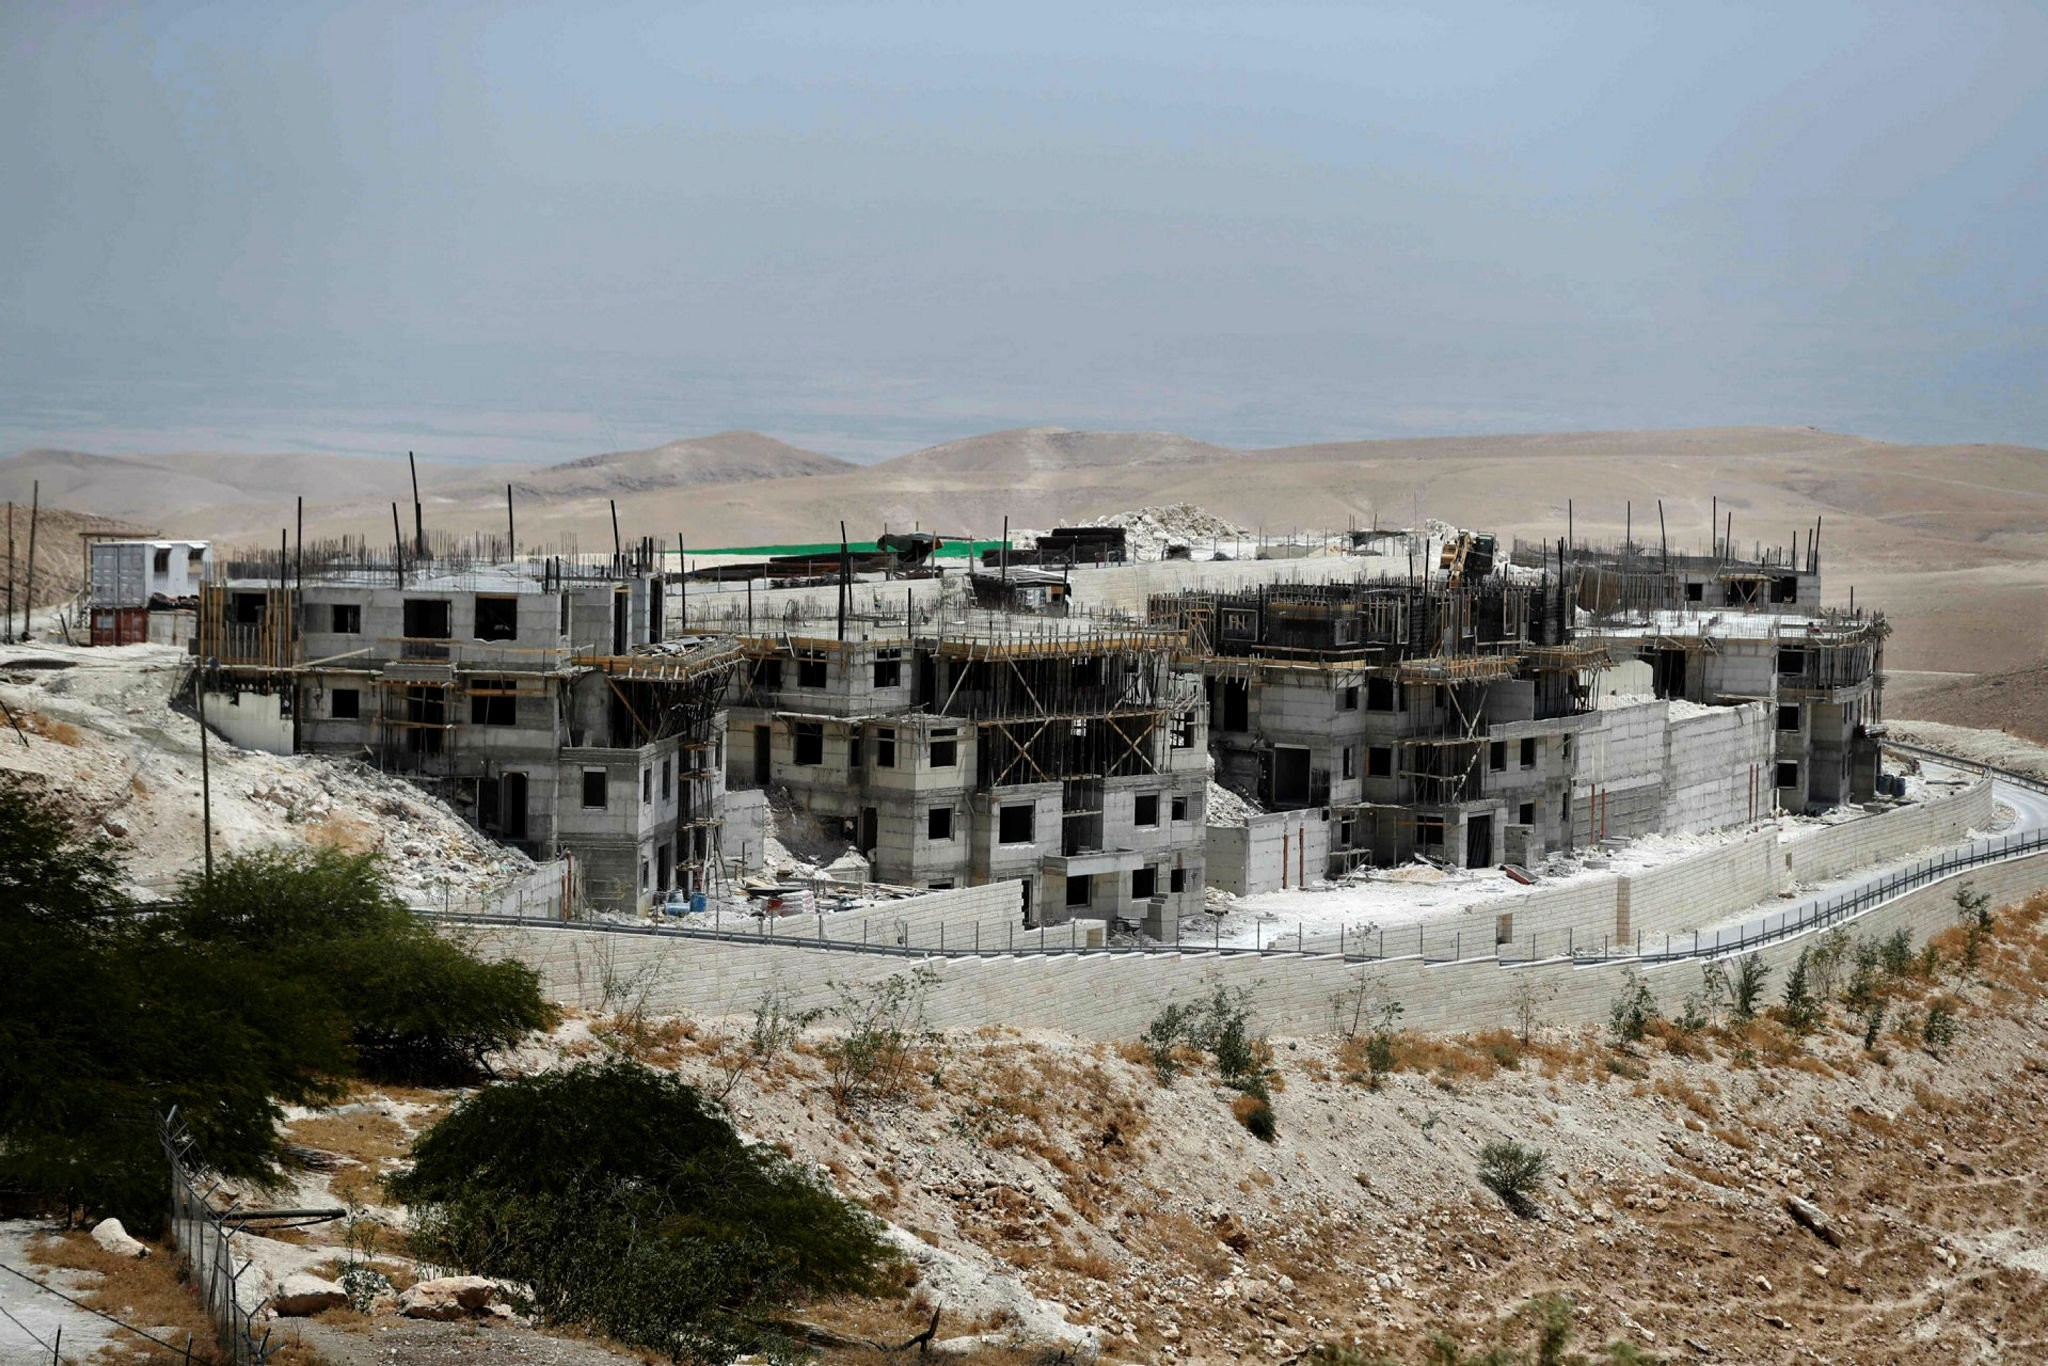 A picture taken on July 4, 2016, shows buildings under construction in the Israeli settlement of Maale Adumim, east of Jerusalem in the occupied West Bank. (AFP Photo)